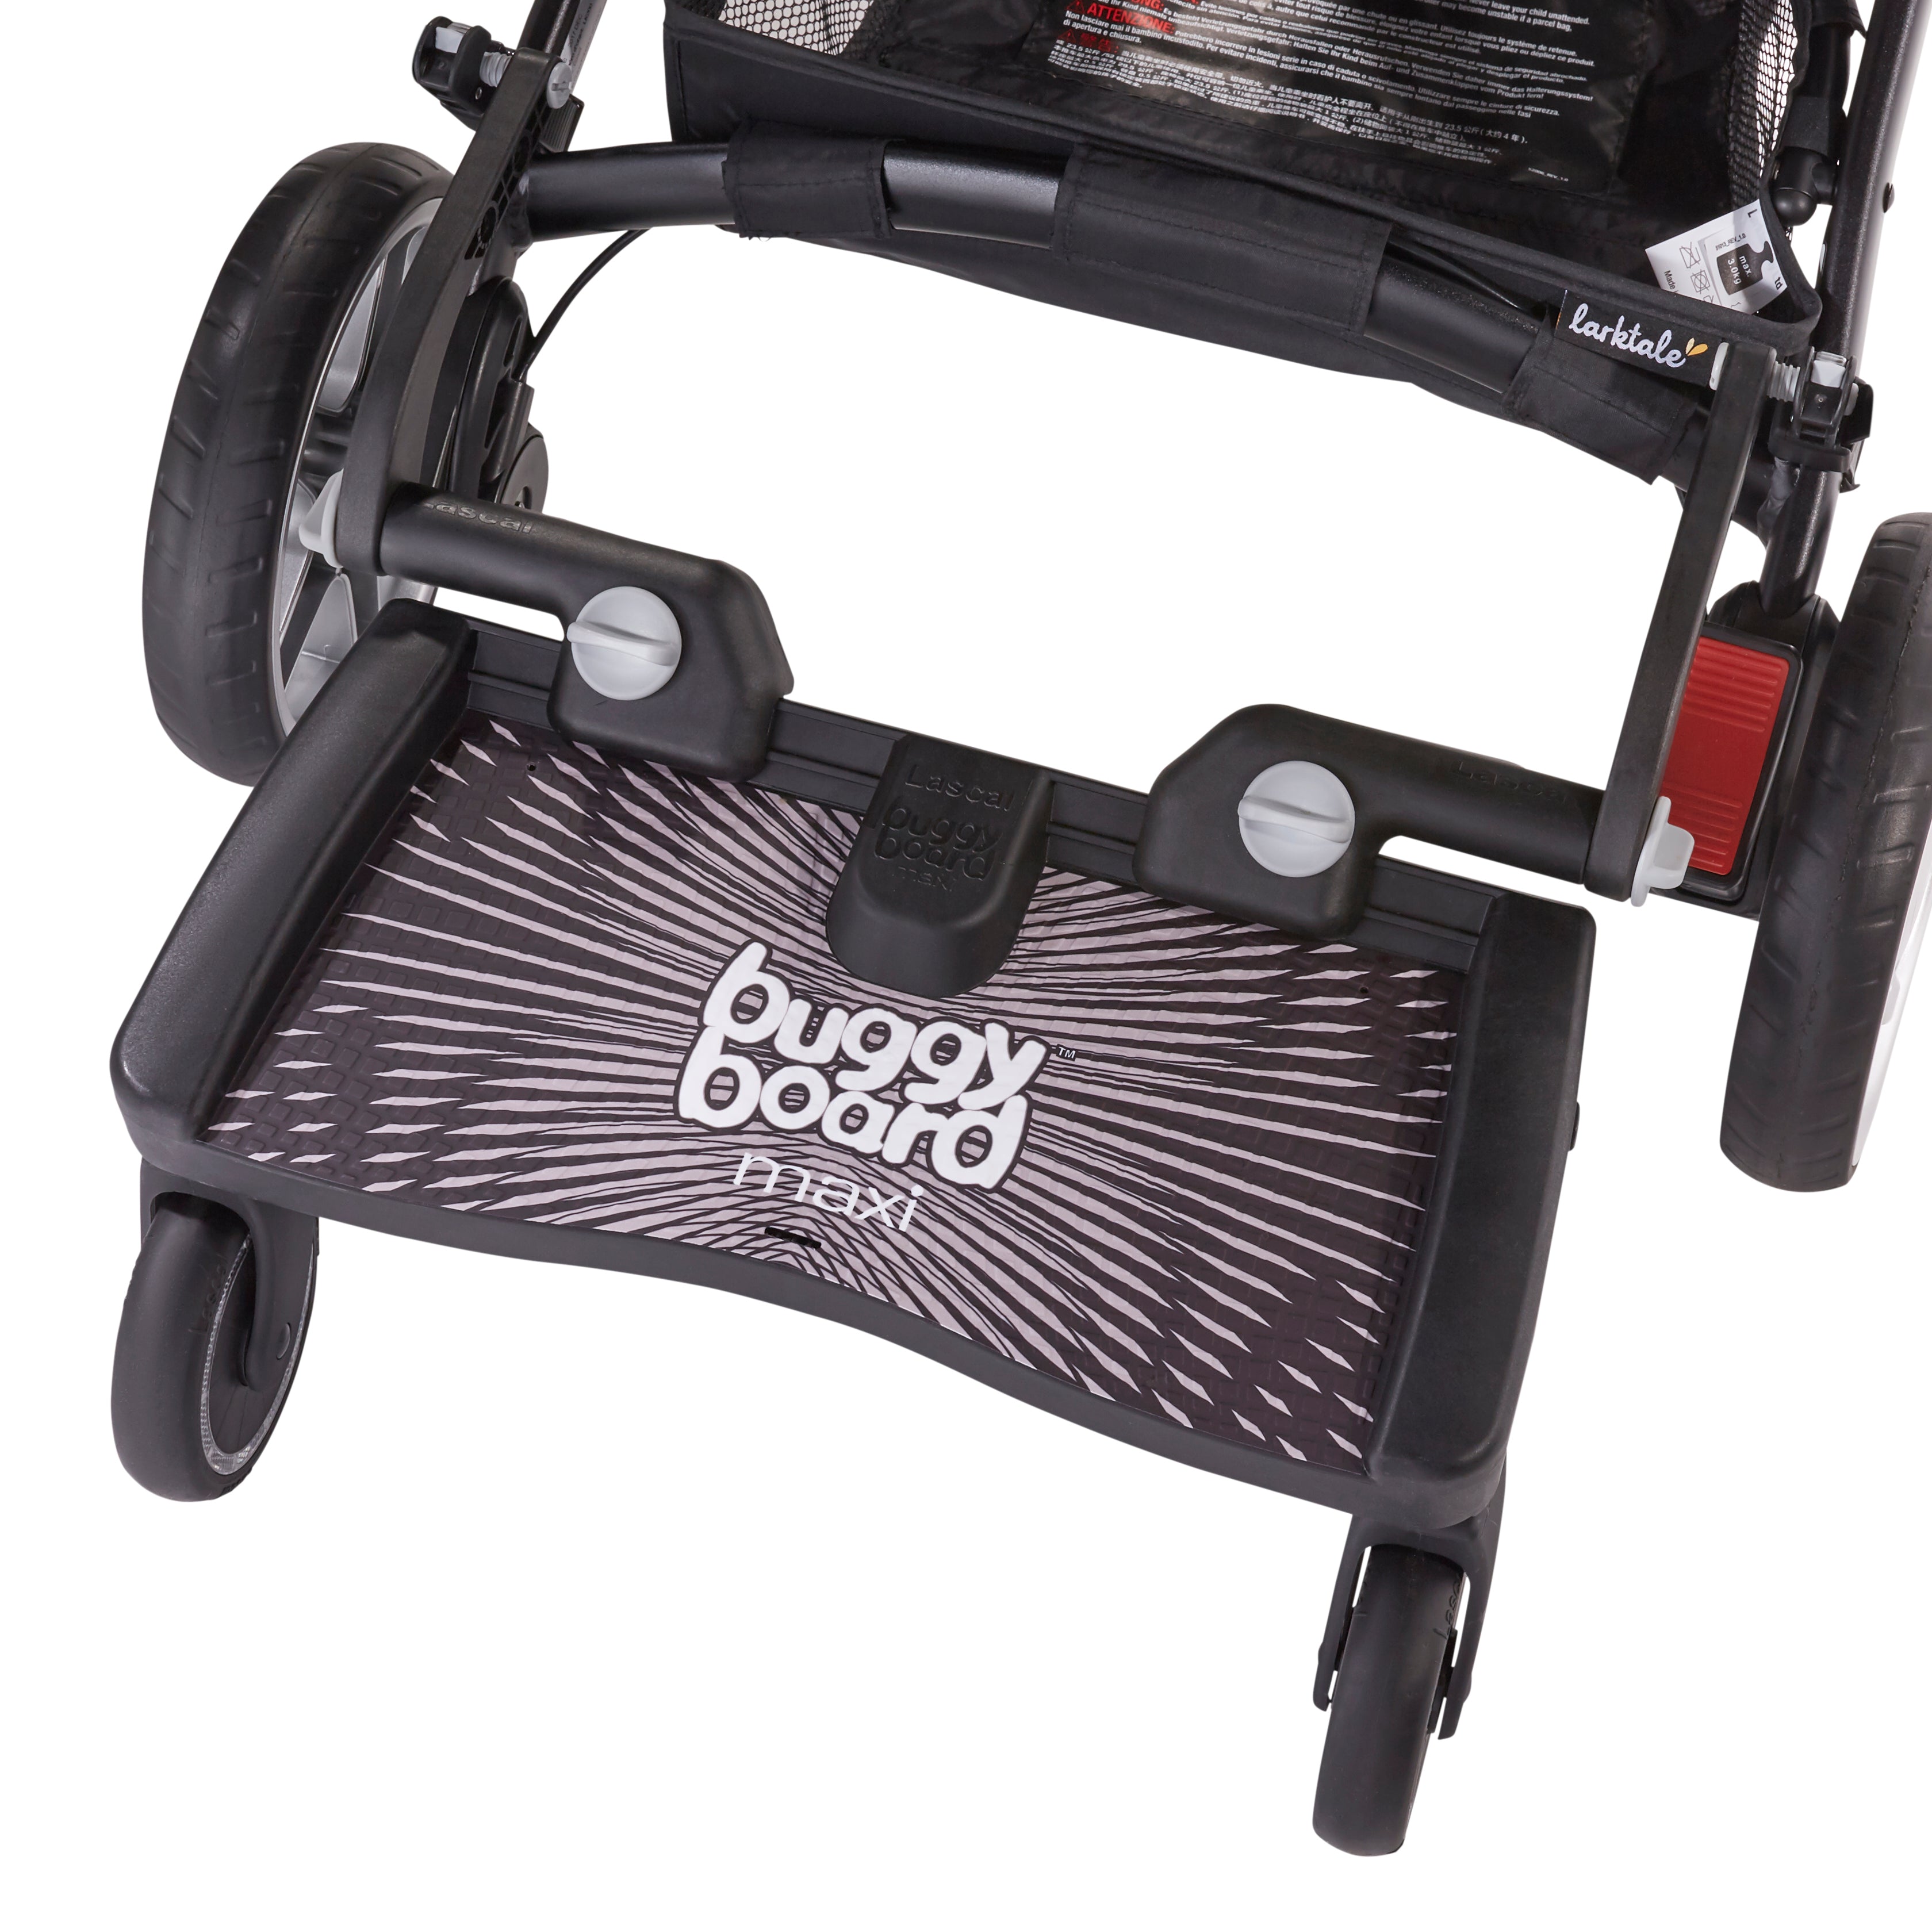 remove wheels from lascal buggy board